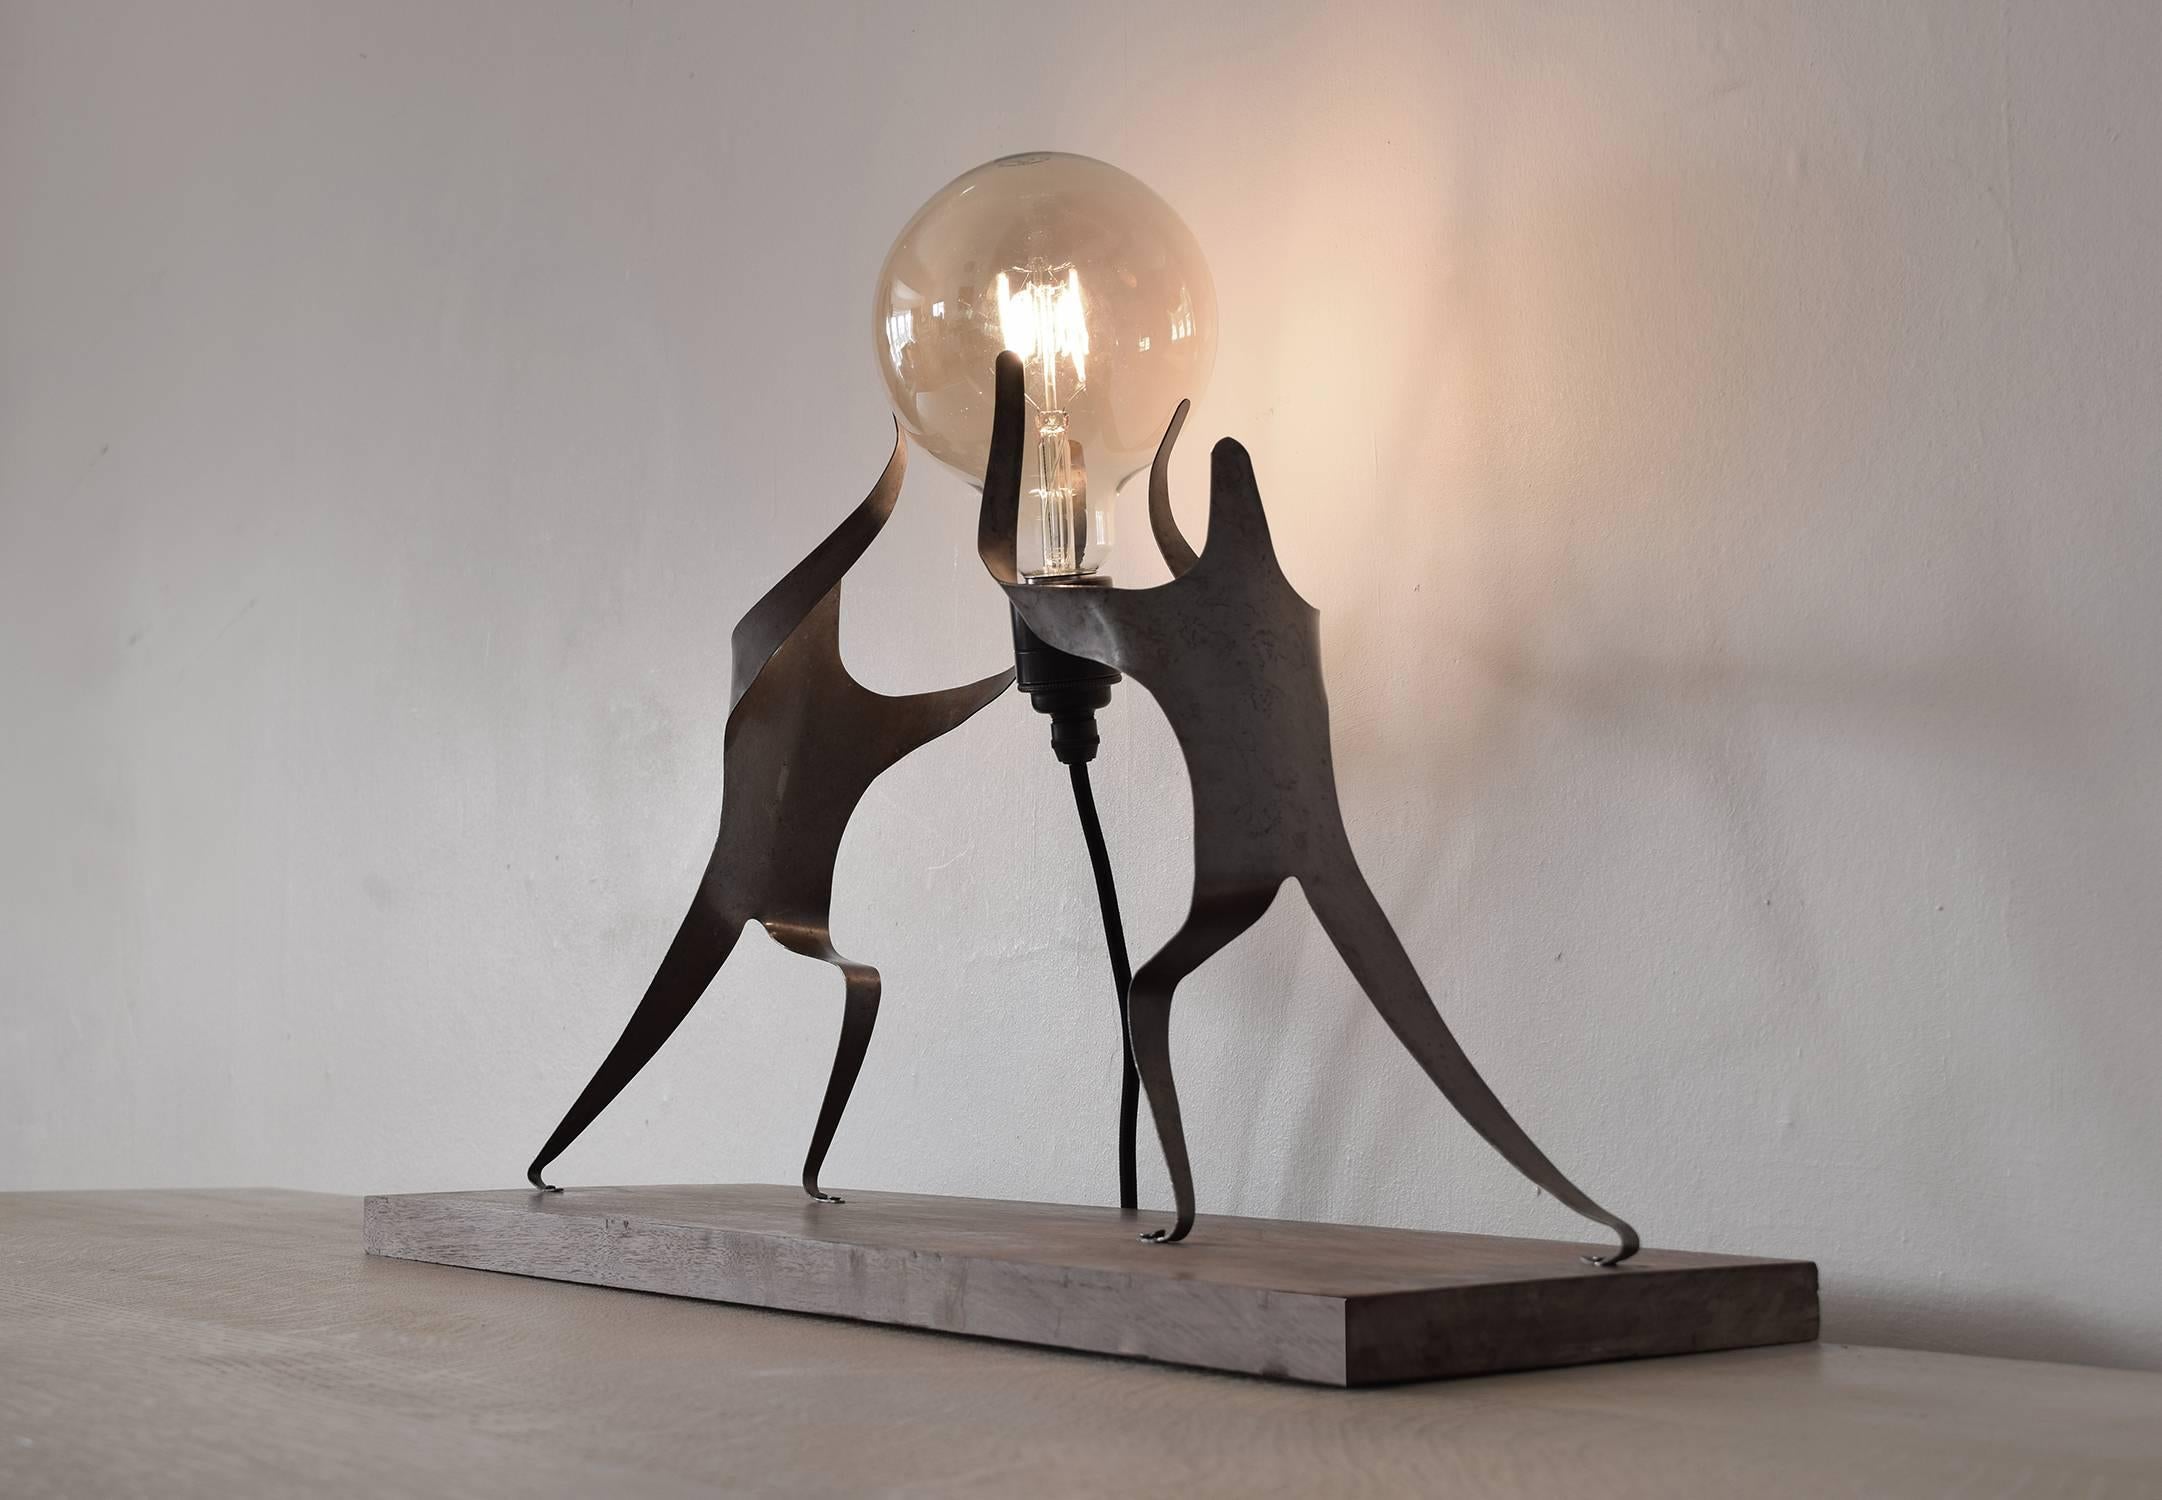 Hand-Crafted Sculptural Table Lamp. Steel and Walnut, 2015